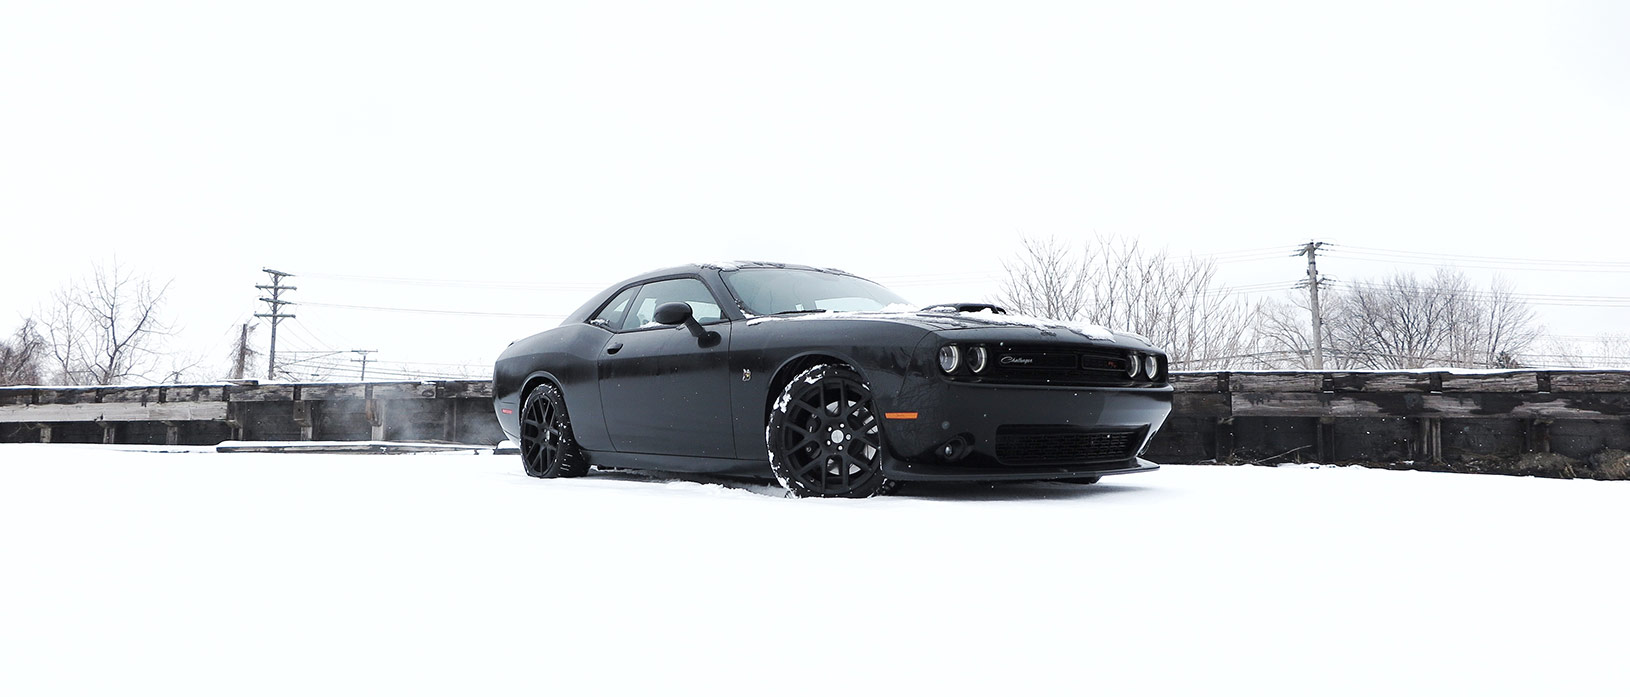 Dodge Demon being driven in the snow